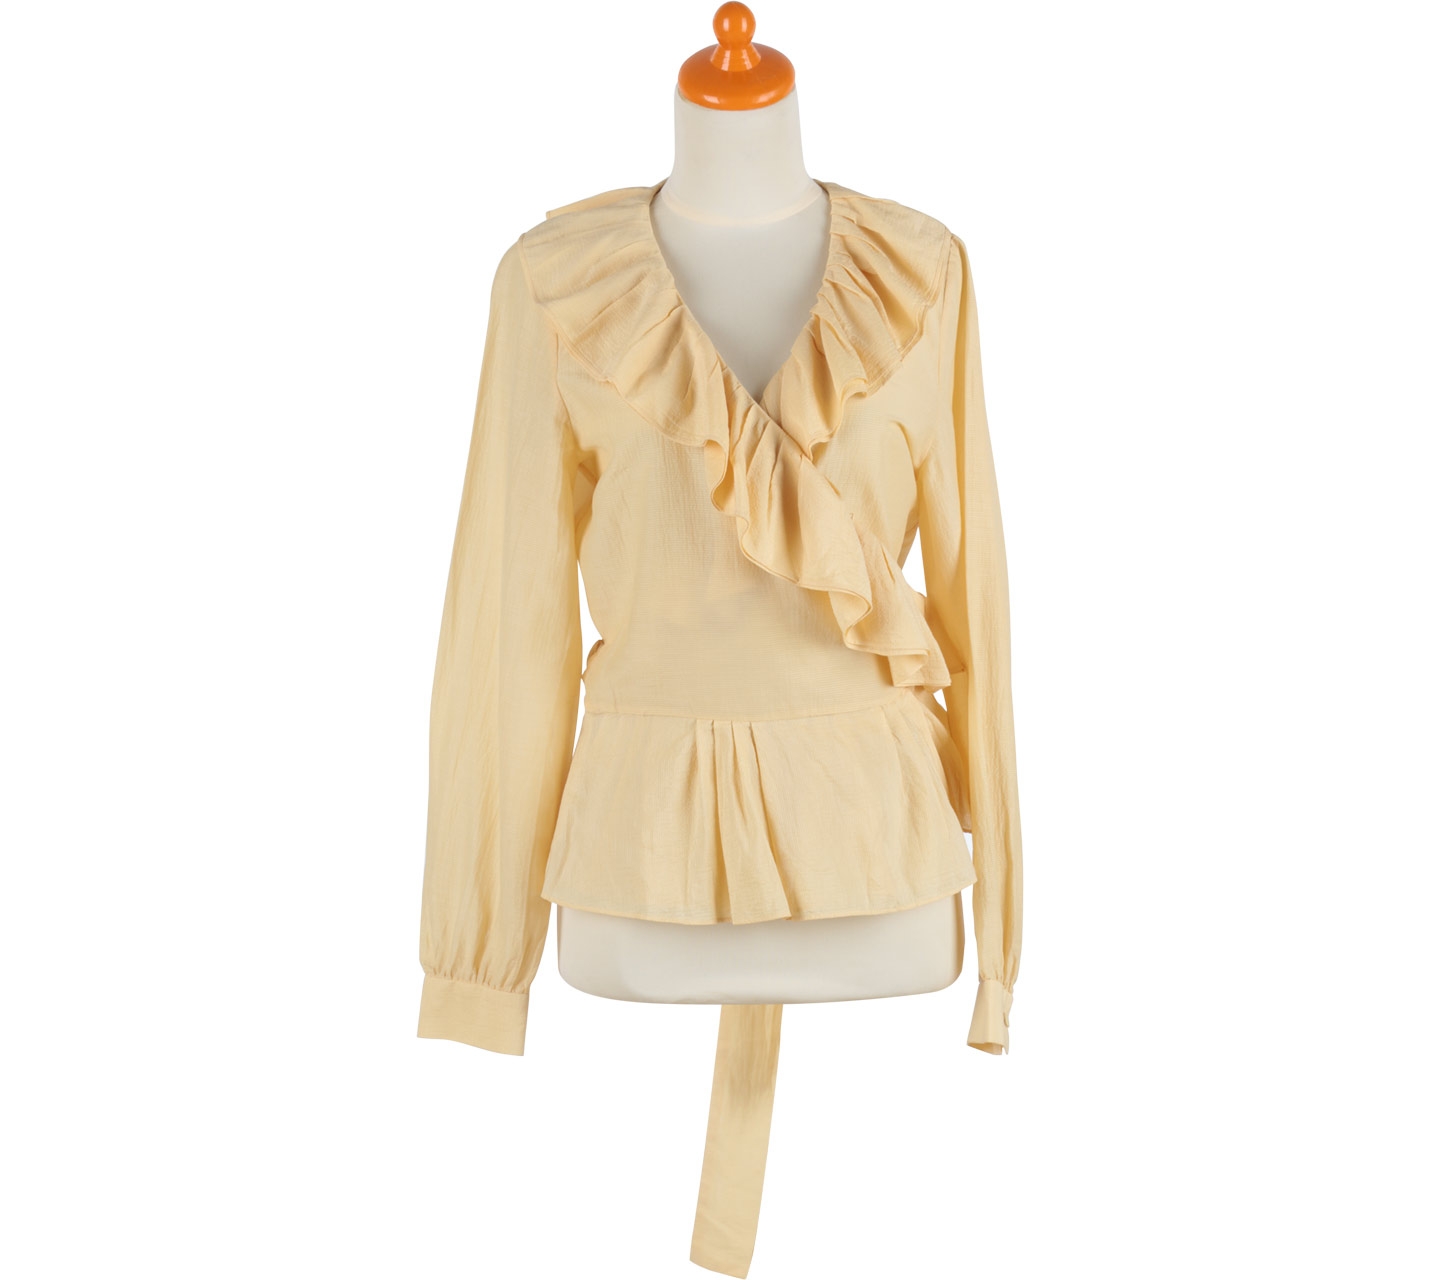 Kenneth Cole Yellow Wrap Ruffles Blouse